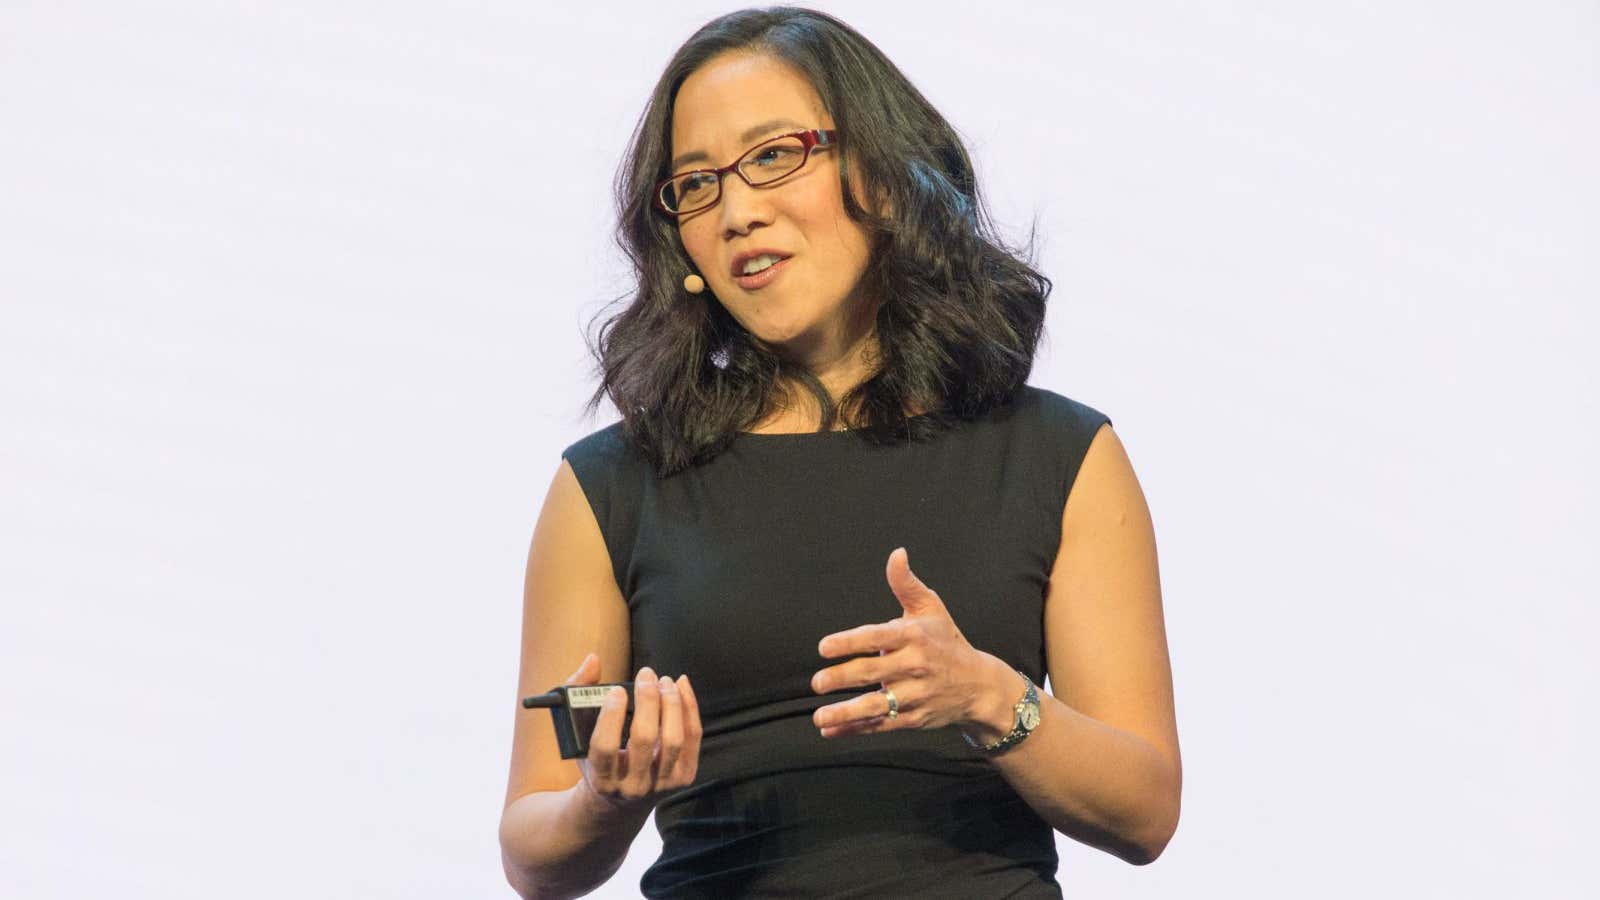 Angela Duckworth knows grit—and how to get it.